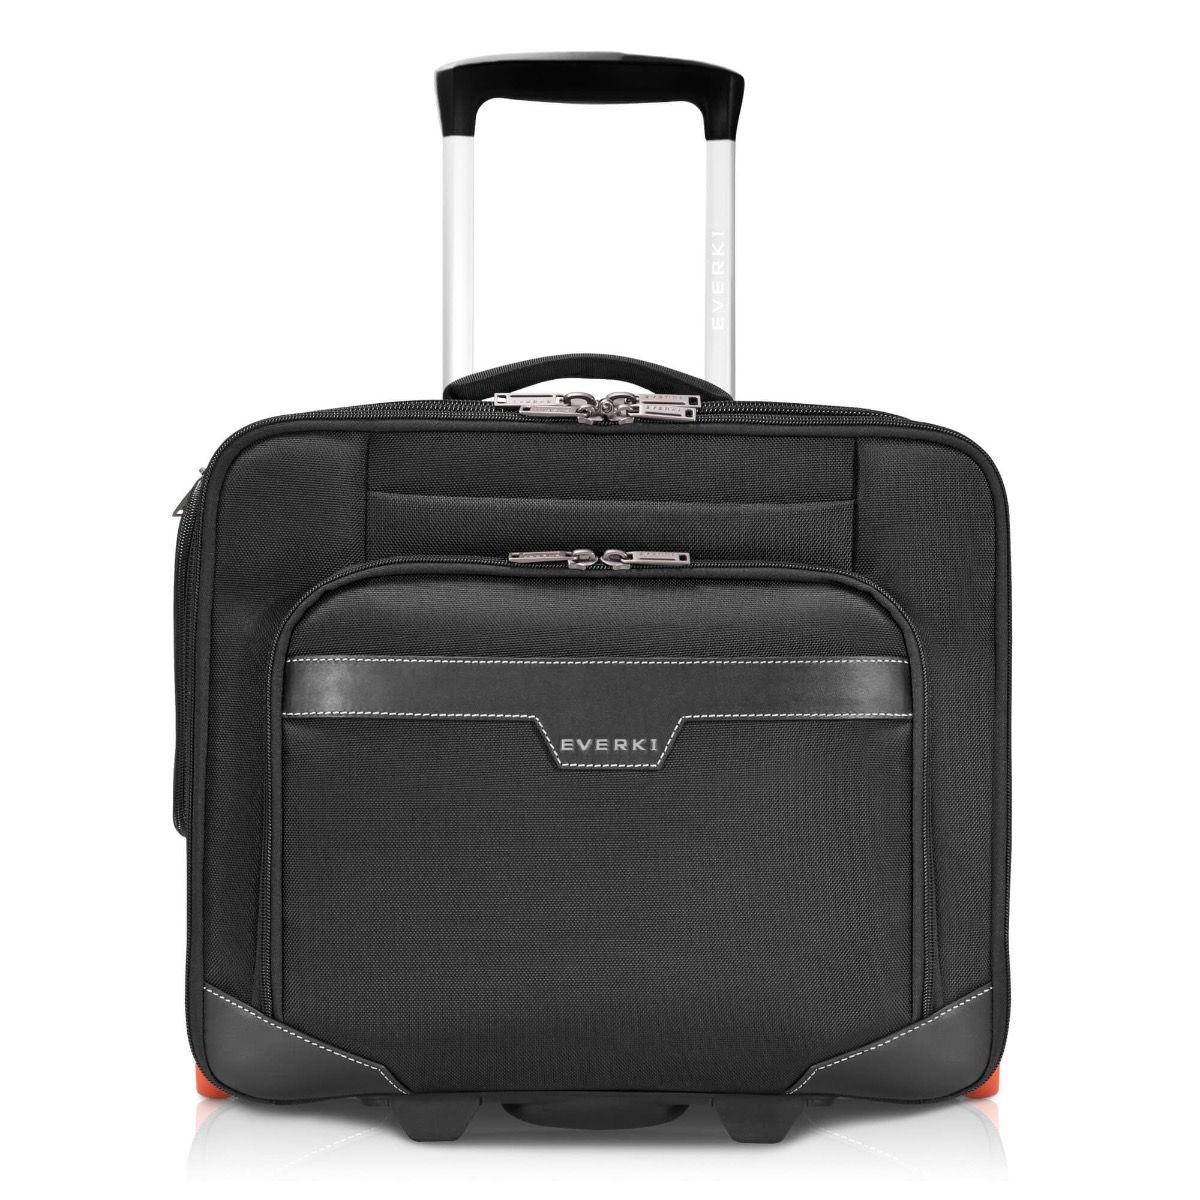 Premium Lightweight Business Executive Laptop Roller Mobile Office Bag on 4 Wheels Fits 15-16 Laptops & Carry-on Hand Luggage Cabin Approved for EasyJet & BA Carry-on 4 Wheels, Black